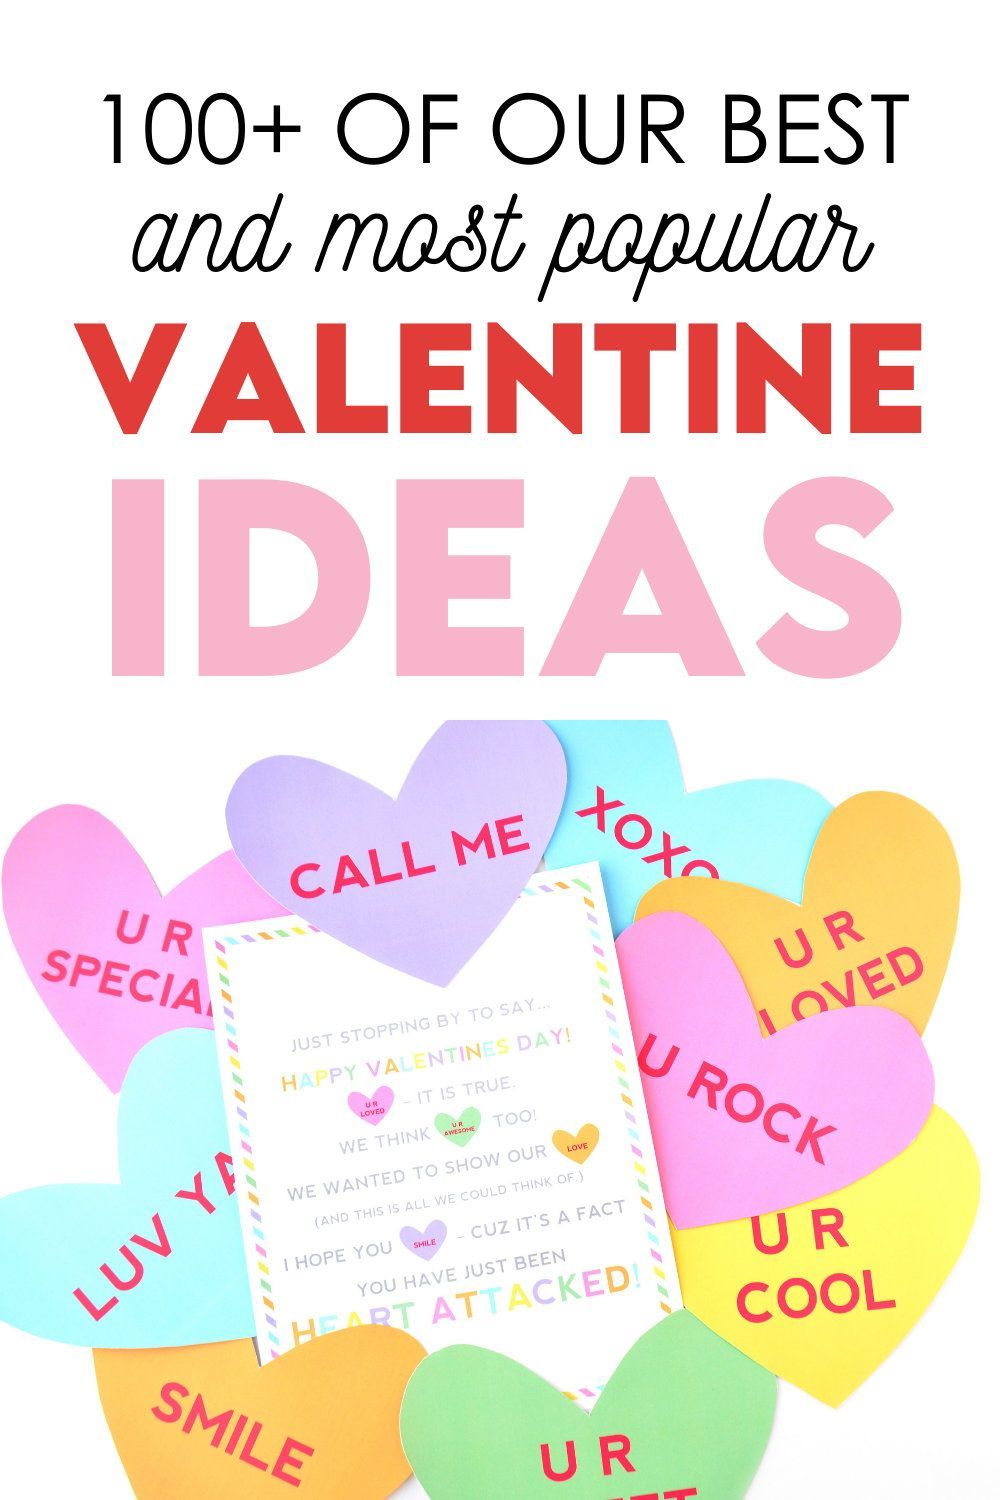 Our Most Popular Valentines Day Ideas | The Dating Divas